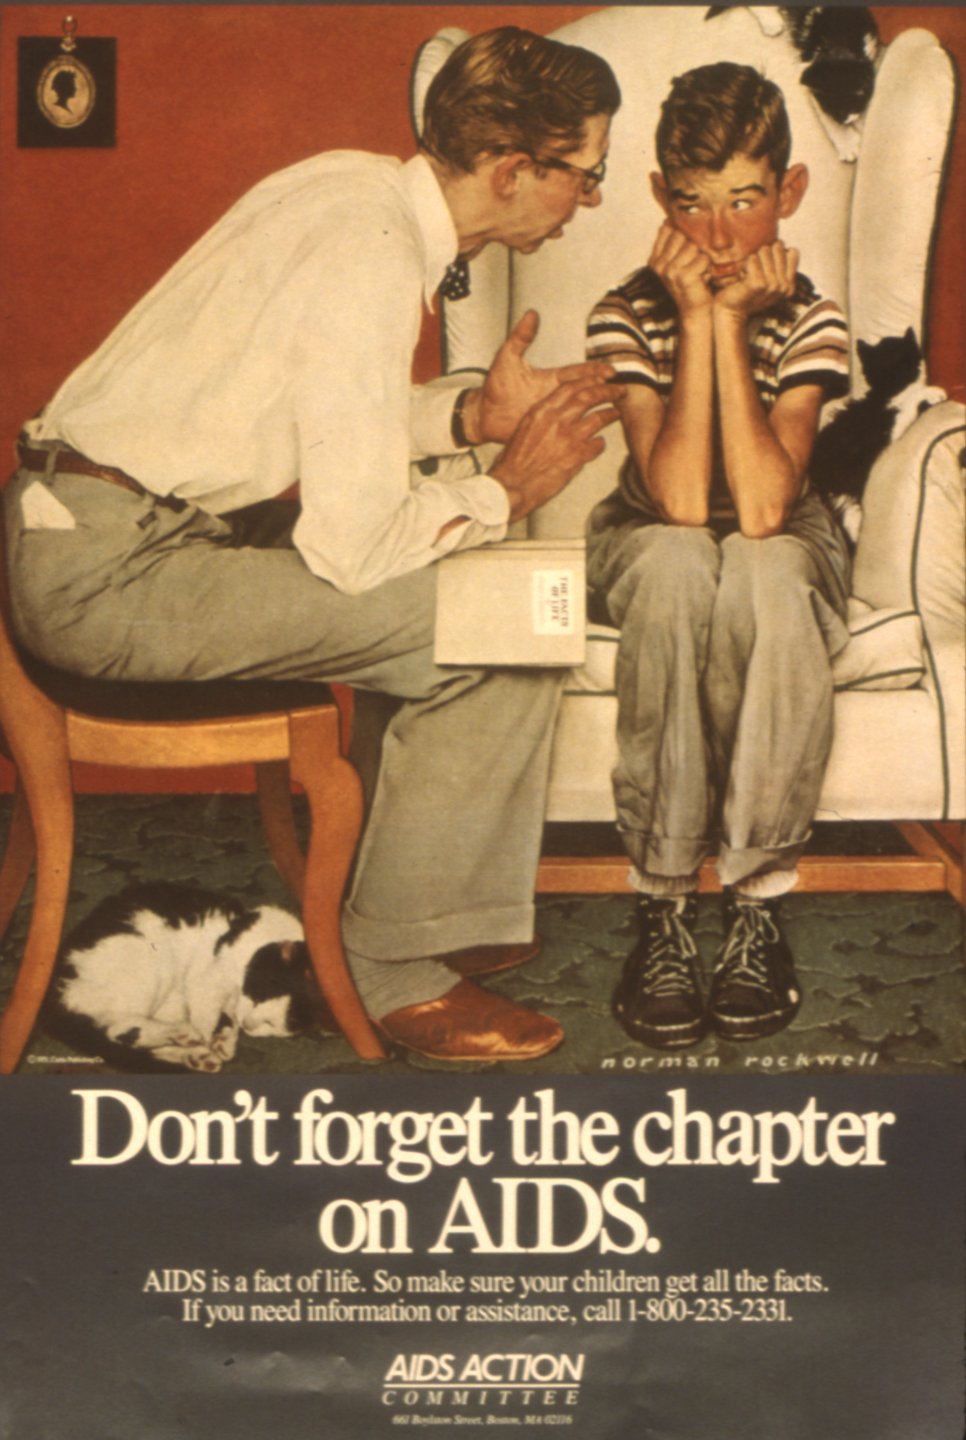 Classic Norman Rockwell painting of an earnest 1950s dad leaning forward talking to his lanky son who has his chin in his hands looking at his dad like this is all very disturbing. A book in Dad's lap subtley says 'Facts of Life.' Below Rockwell's painting in this use of the painting in a 1980s poster, ad copy says 'Don't forget the chapter on AIDS. AIDS is a fact of life. So make sure your children get all the facts. If you need information or assistance, call 1-800-235-2331. AIDS ACTION COMMITTEE